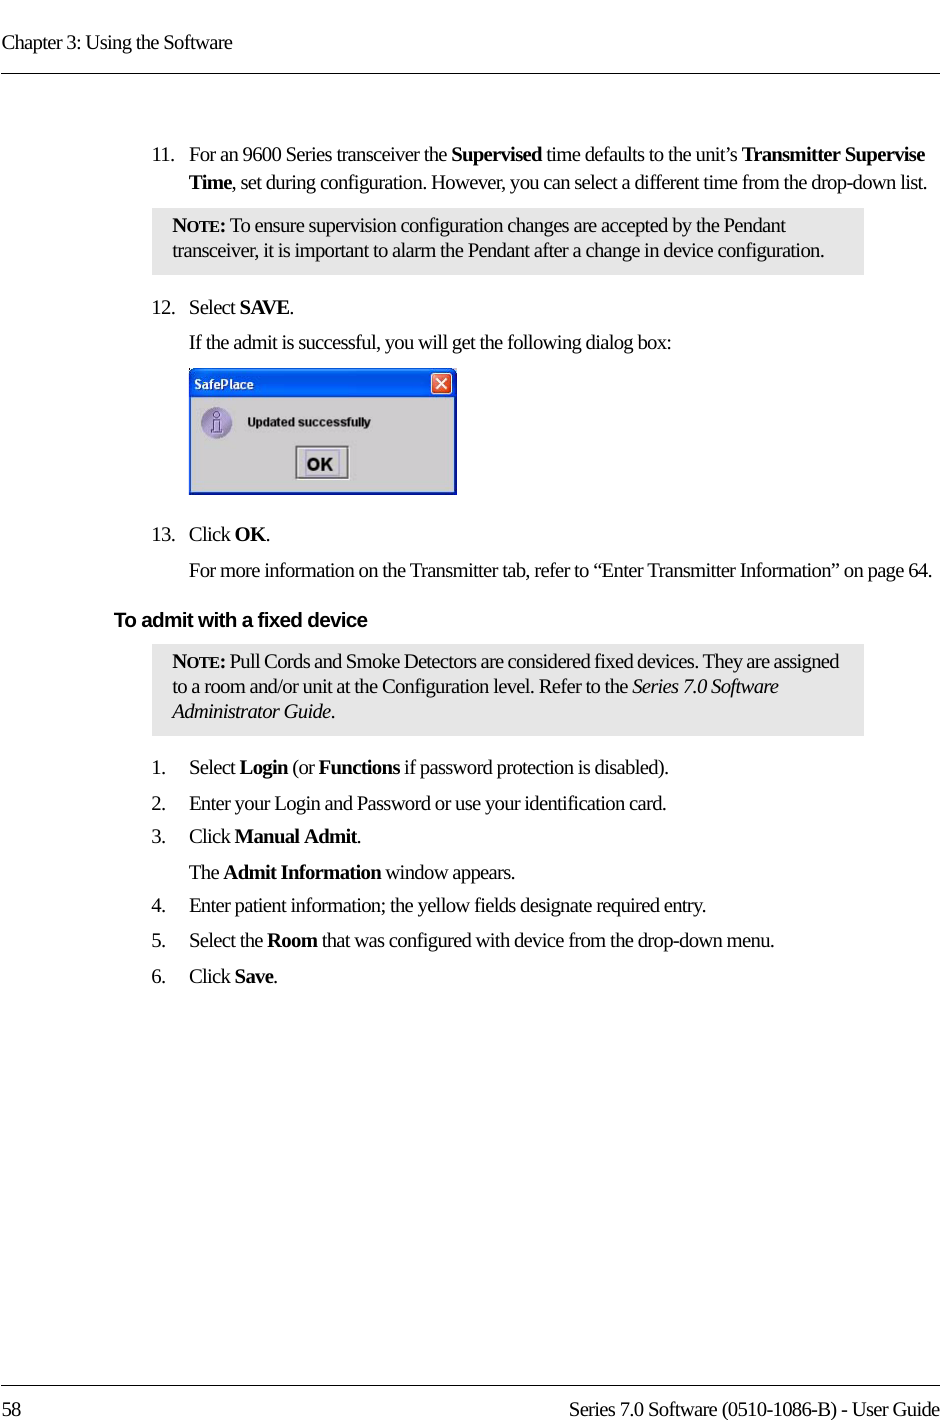 Chapter 3: Using the Software58 Series 7.0 Software (0510-1086-B) - User Guide11.   For an 9600 Series transceiver the Supervised time defaults to the unit’s Transmitter Supervise Time, set during configuration. However, you can select a different time from the drop-down list.12.   Select SAVE.If the admit is successful, you will get the following dialog box:13.   Click OK.For more information on the Transmitter tab, refer to “Enter Transmitter Information” on page 64.To admit with a fixed device 1.    Select Login (or Functions if password protection is disabled).2.    Enter your Login and Password or use your identification card. 3.    Click Manual Admit. The Admit Information window appears.4.    Enter patient information; the yellow fields designate required entry. 5.    Select the Room that was configured with device from the drop-down menu.6.    Click Save.NOTE: To ensure supervision configuration changes are accepted by the Pendant transceiver, it is important to alarm the Pendant after a change in device configuration.NOTE: Pull Cords and Smoke Detectors are considered fixed devices. They are assigned to a room and/or unit at the Configuration level. Refer to the Series 7.0 Software Administrator Guide.